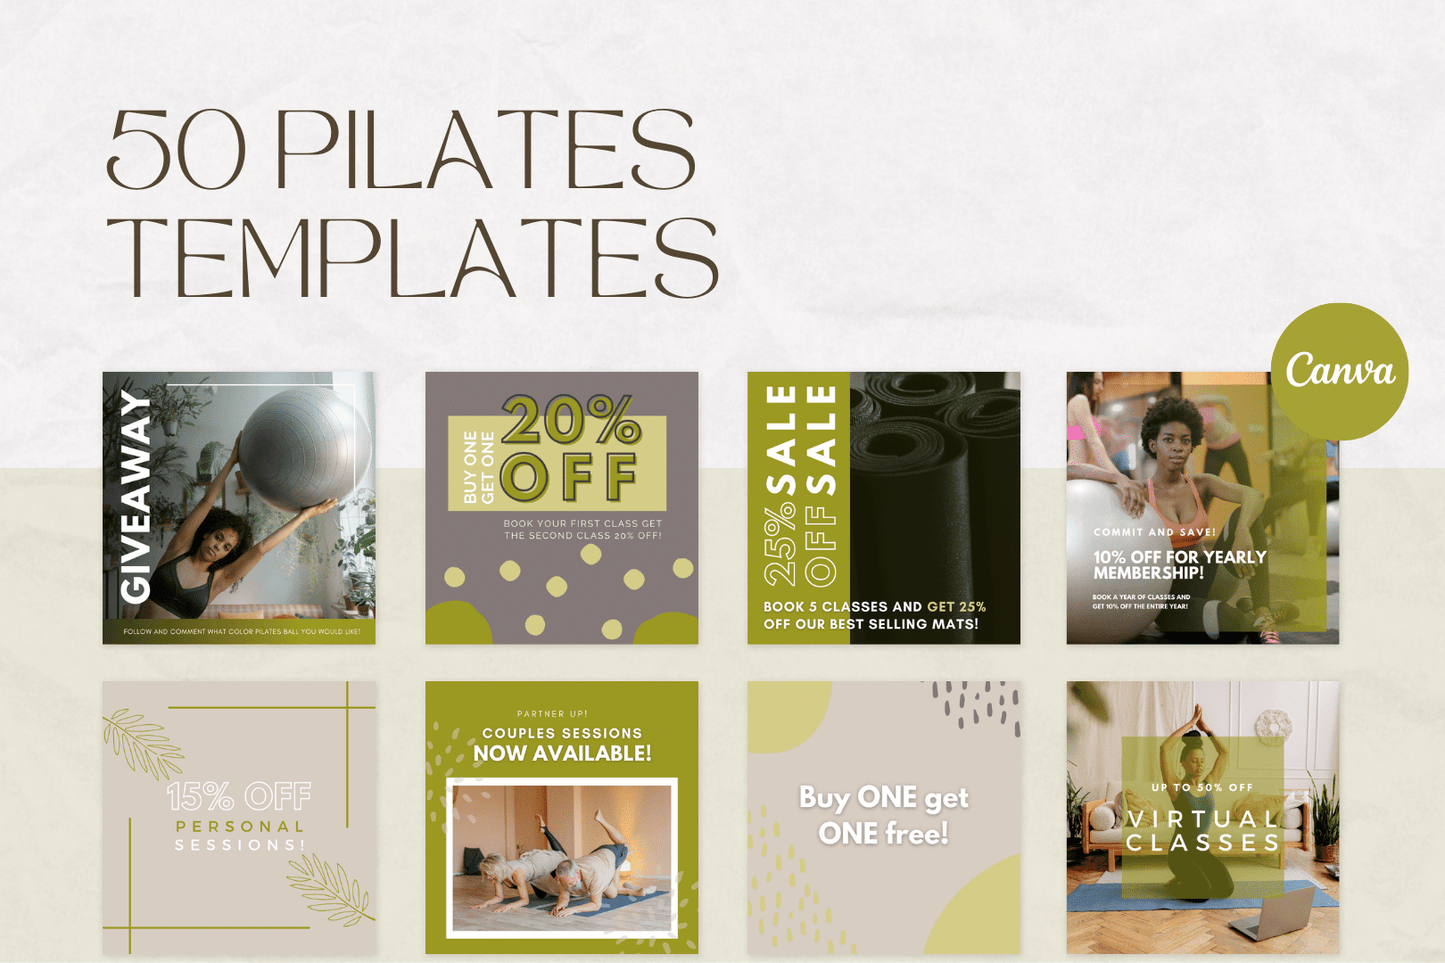 50 Promotional Posts for Pilates